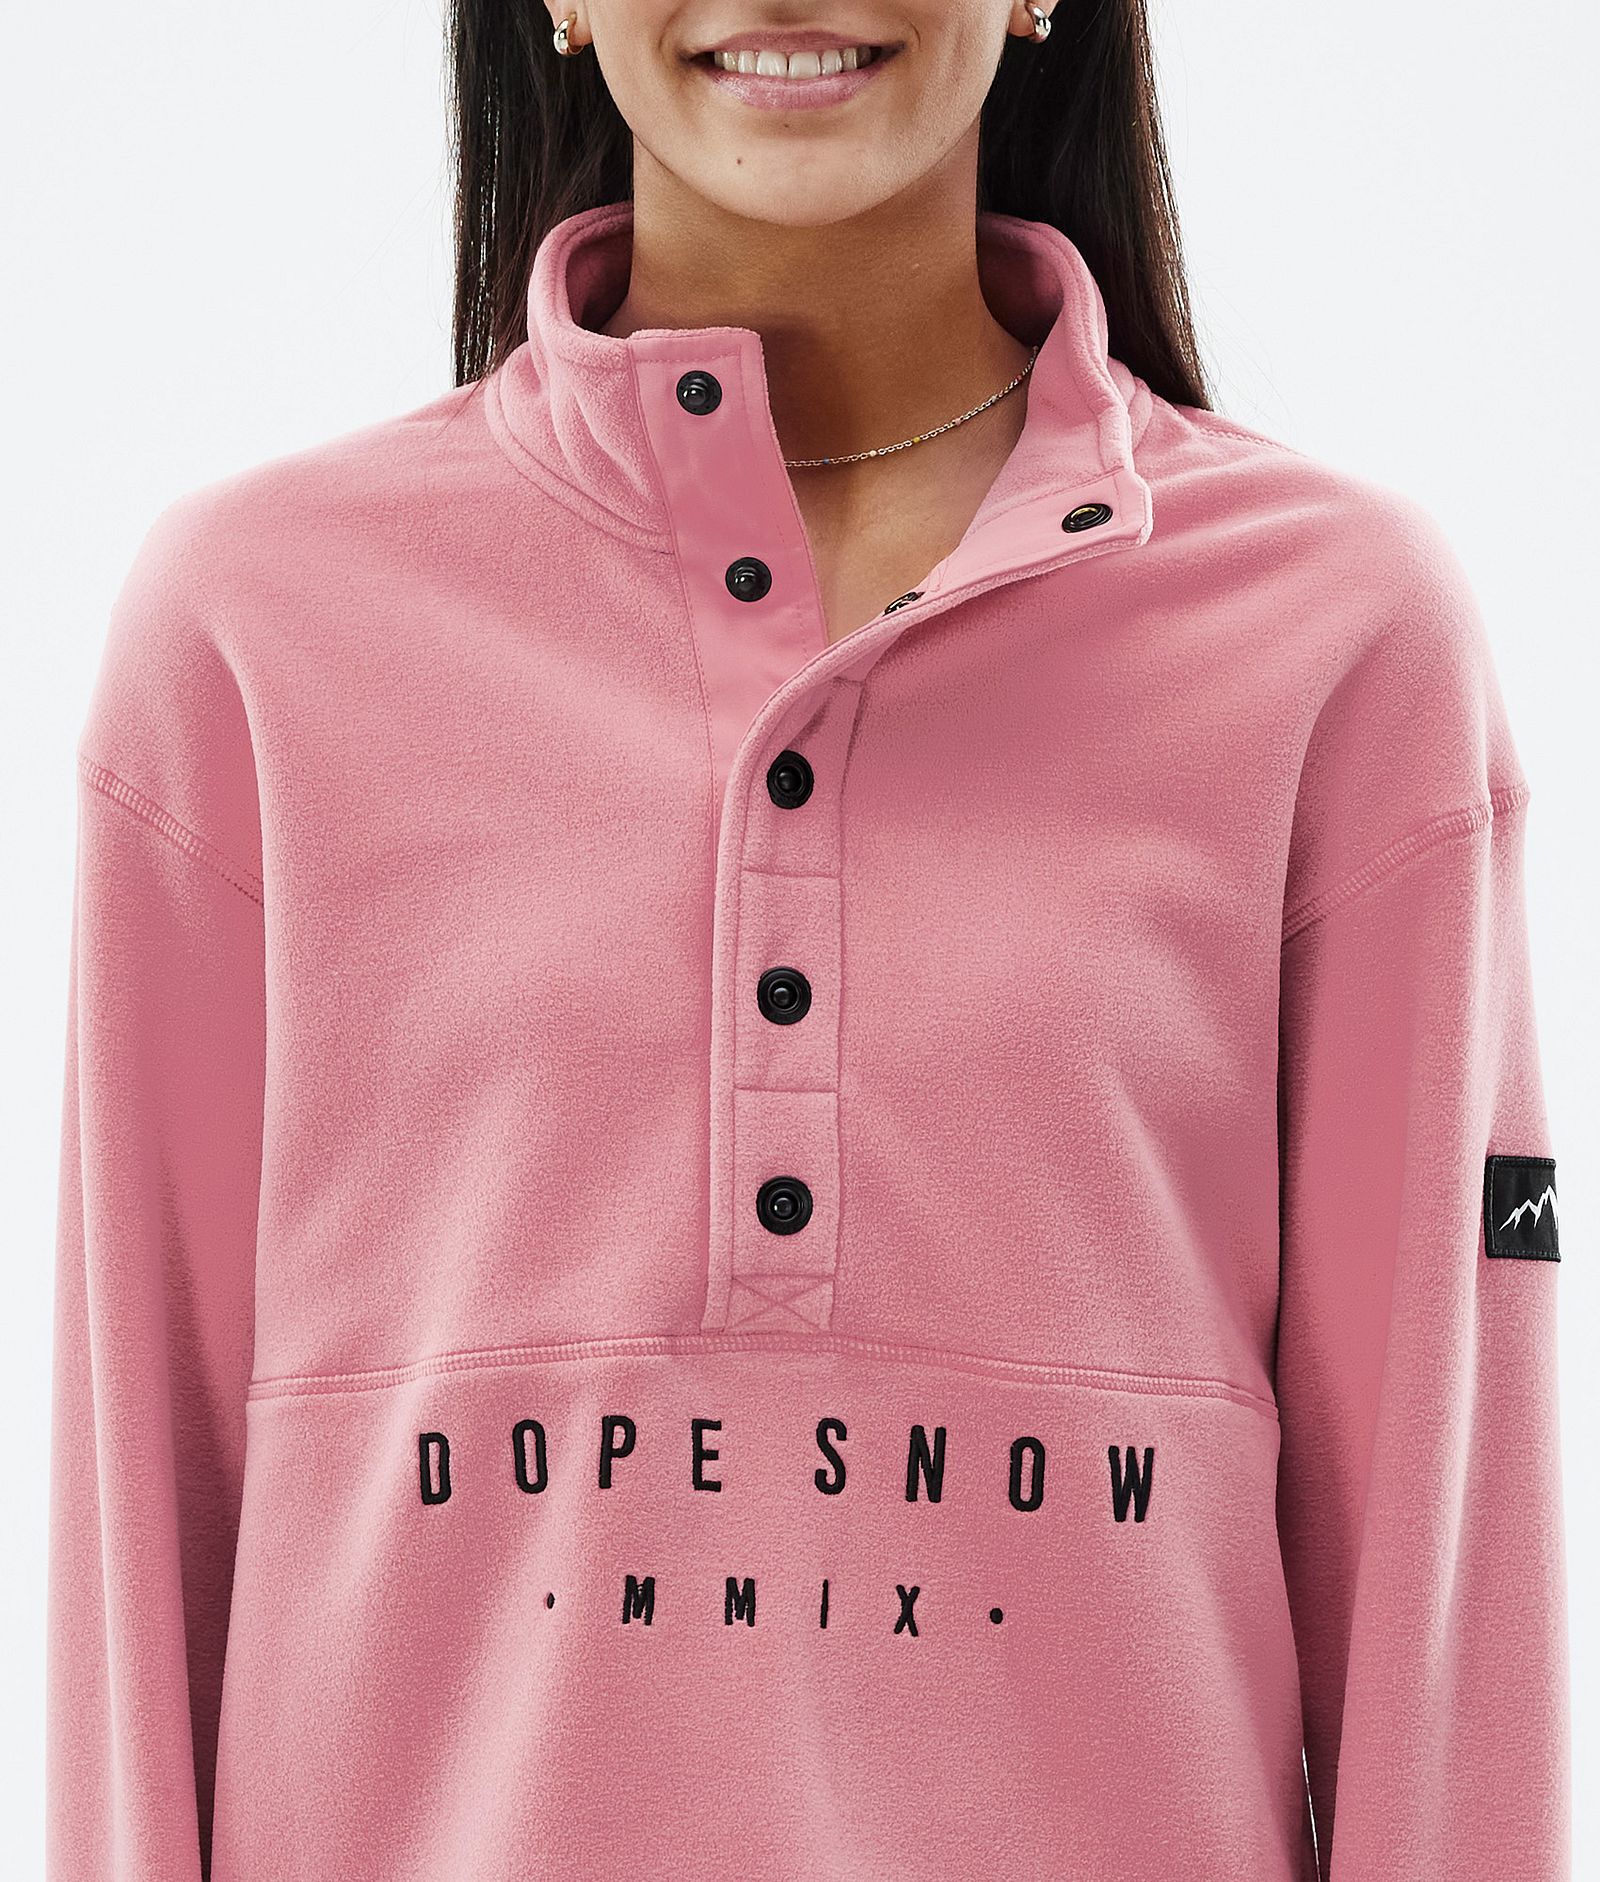 Dope Comfy W Sweat Polaire Femme Pink Renewed, Image 7 sur 7